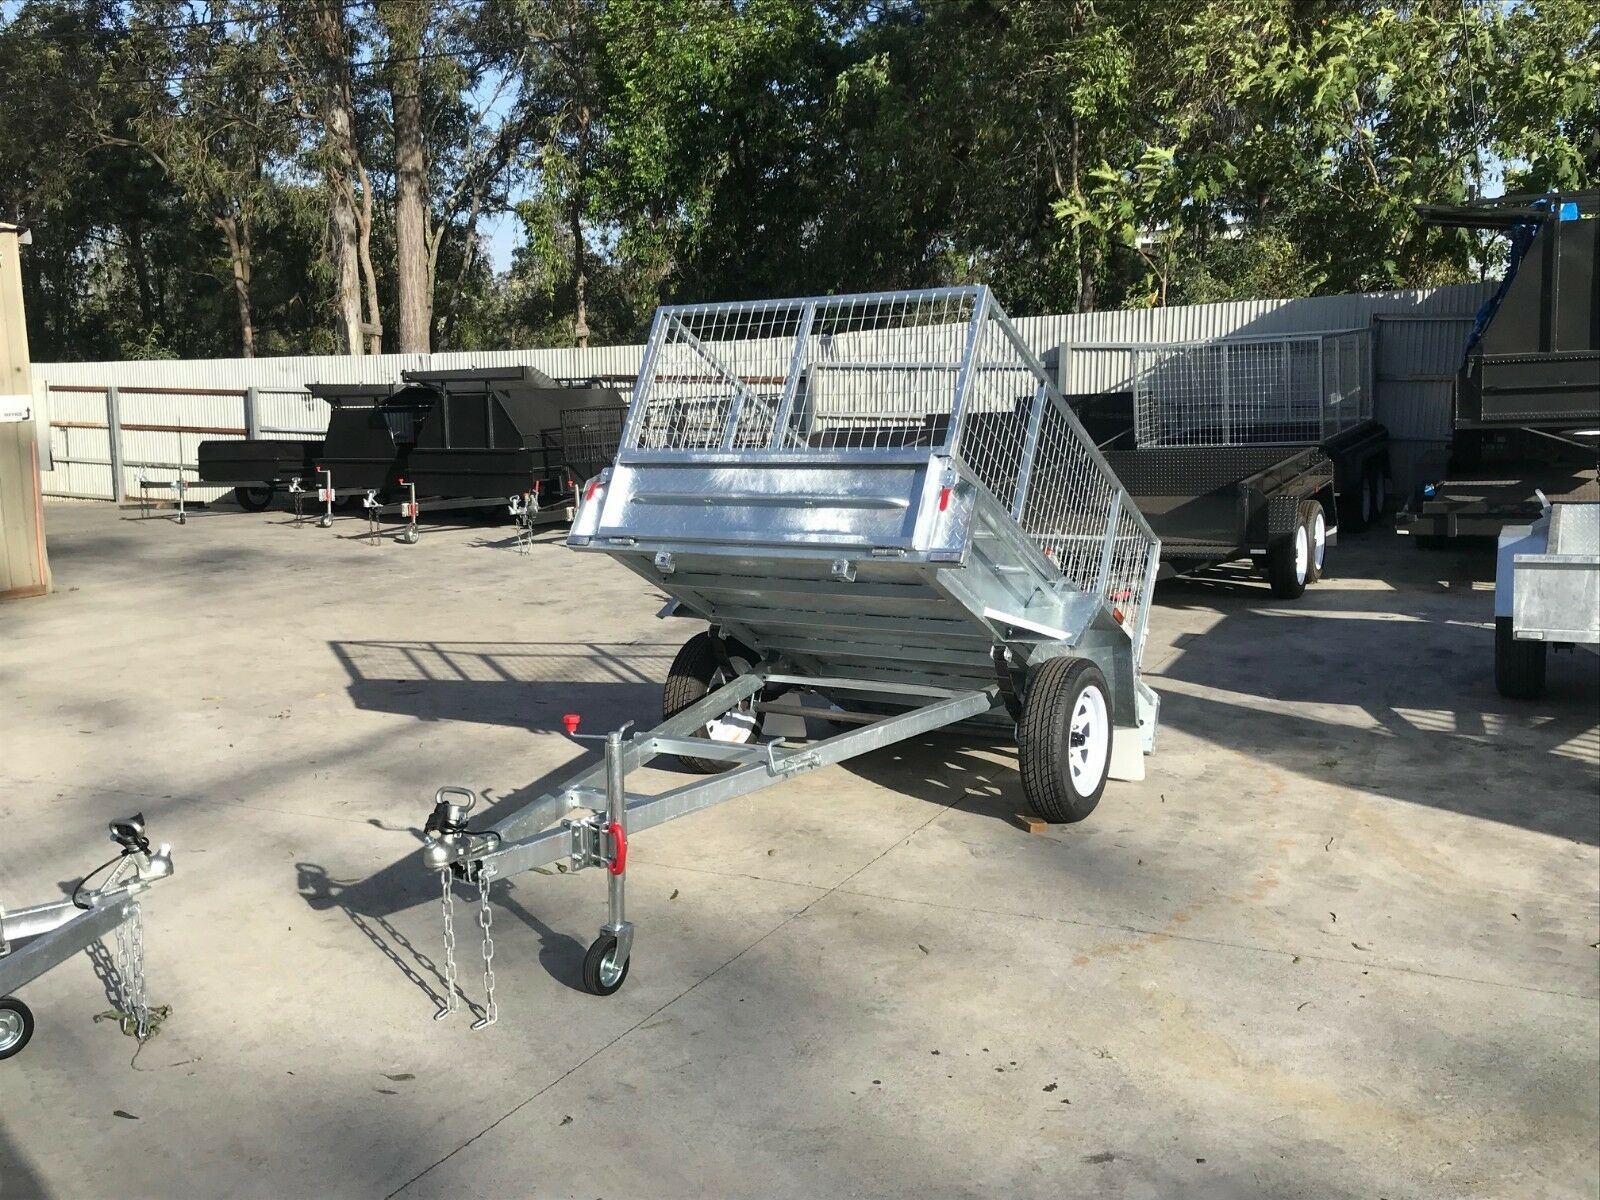 7×4 Heavy Duty Single Axle Galvanised Box Trailer with 3 Ft Cage for Sale in Brisbane<br><br><span class="galv-import">Imported Trailer</span>